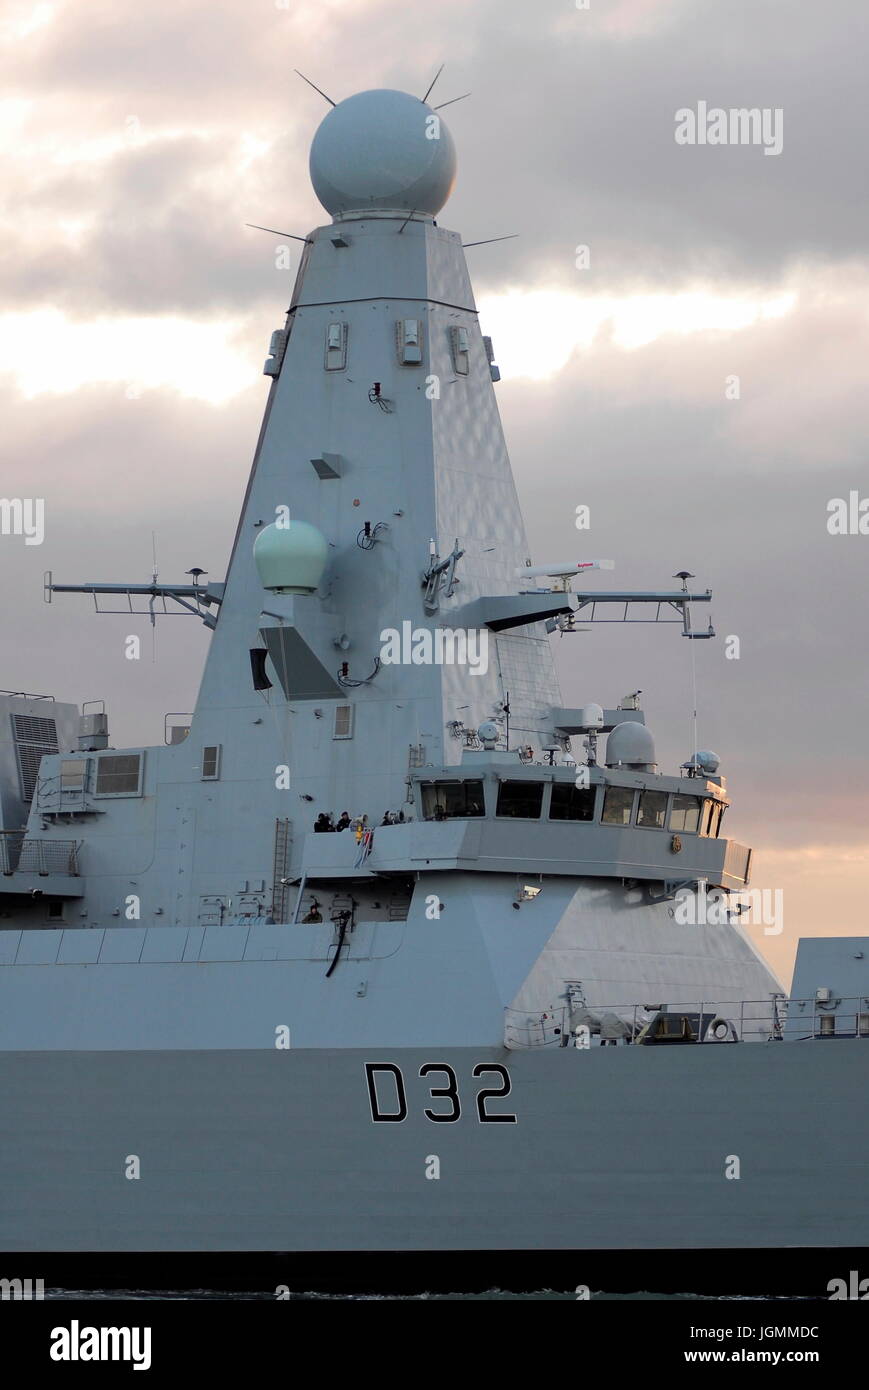 AJAXNETPHOTO. 5TH DECEMBER, 2014. PORTSMOUTH, ENGLAND. - DESTROYER ARRIVES - HMS DARING (TYPE 45) ENTERING HARBOUR AT SUNSET. PHOTO:TONY HOLLAND/AJAX REF:DTH140712 1744 Stock Photo